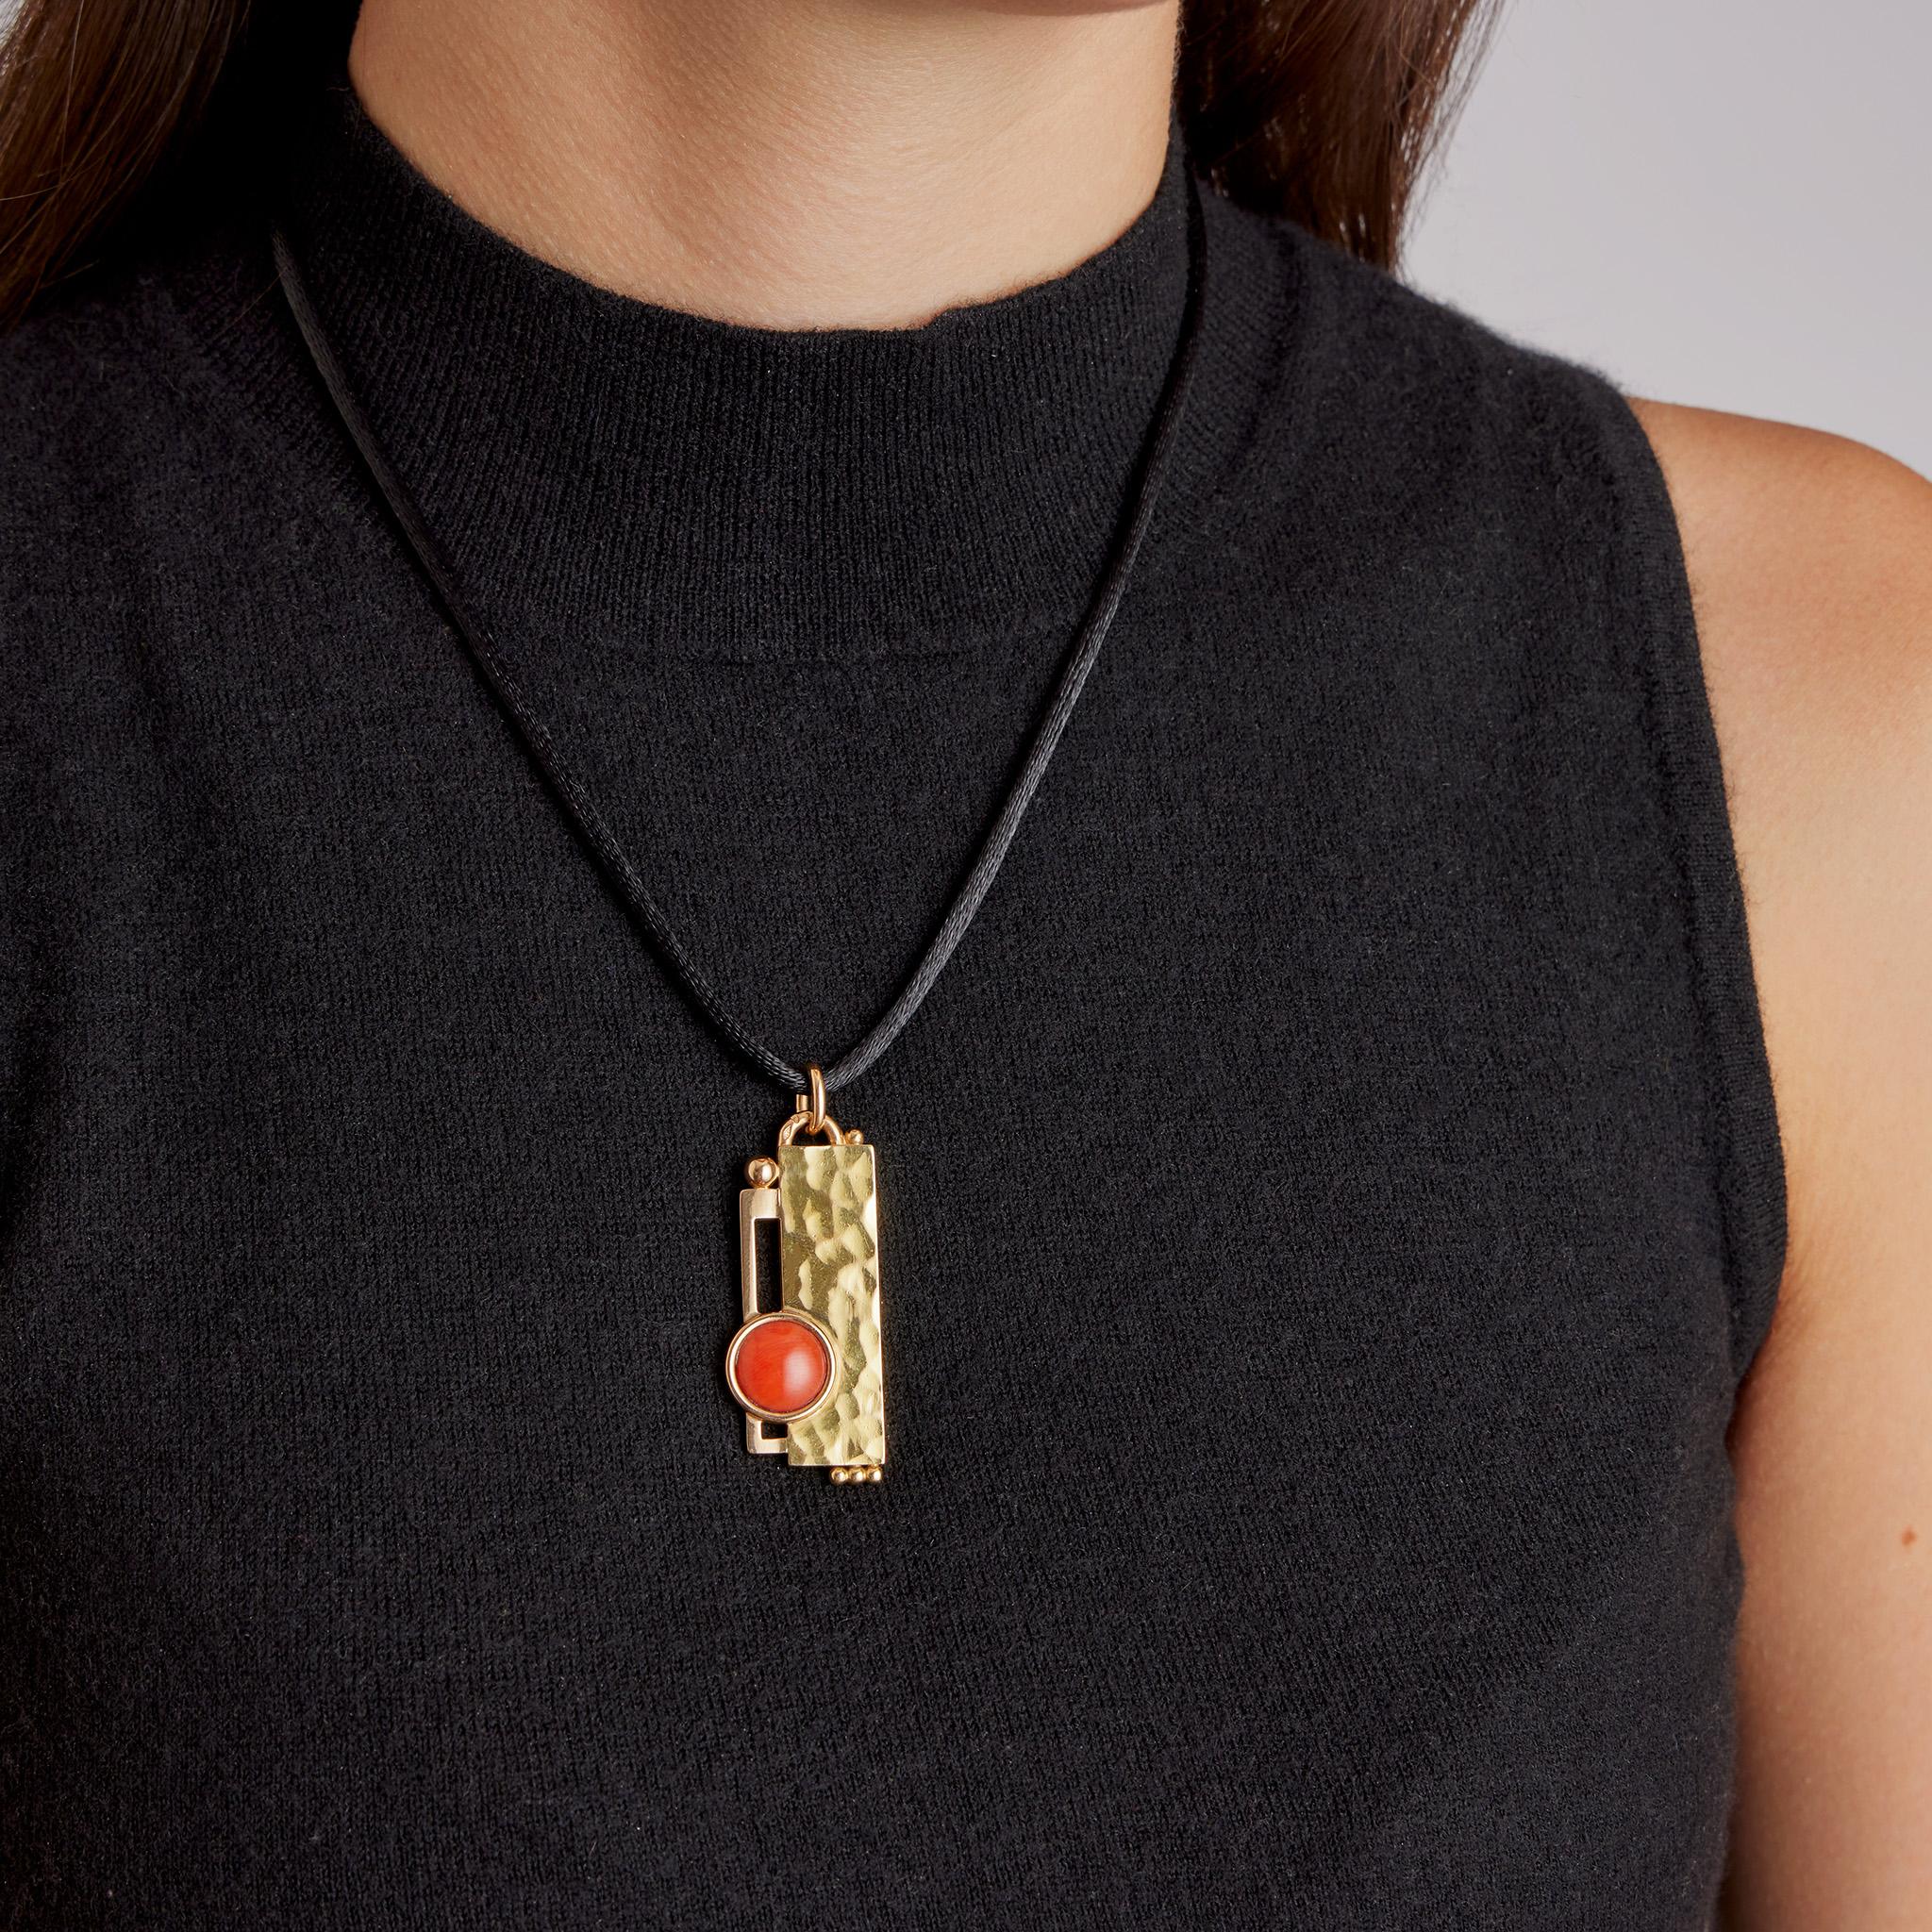 This hammered 18K gold and coral modernist pendant designed and handmade by Jean Després dates from 1930-40. It is designed as hammered rectangular plaque with an asymmetrically set coral cabochon layered over an offset partial rectangular frame,